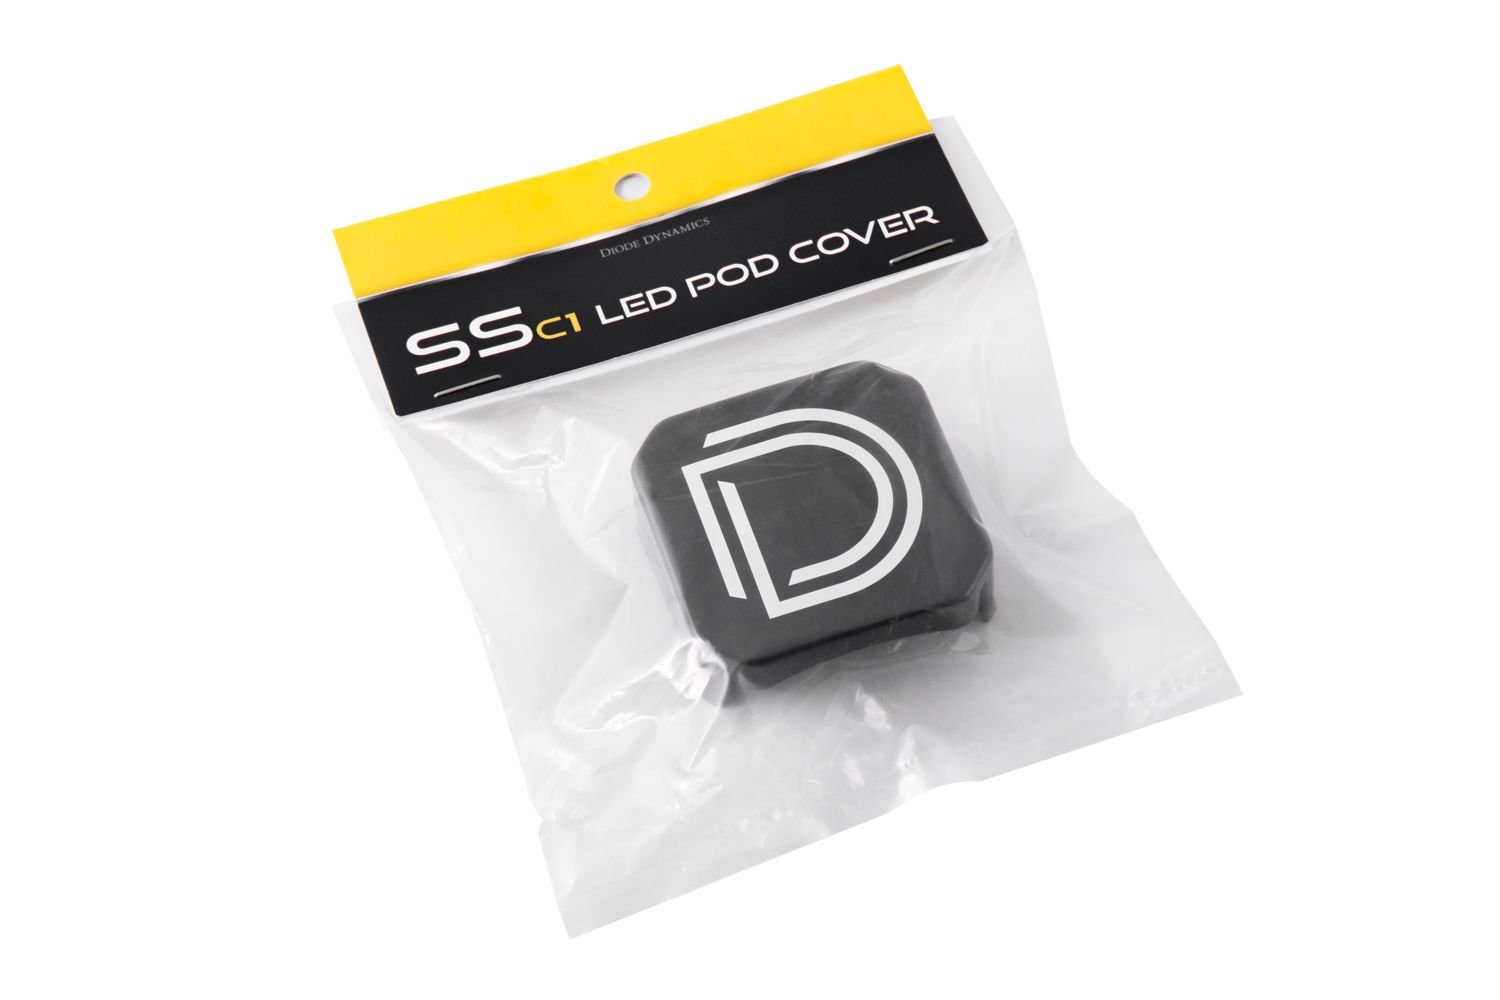 Stage Series C1 LED Pod Covers, (Sold in Singles) Yellow, Clear, Smoked, or Black